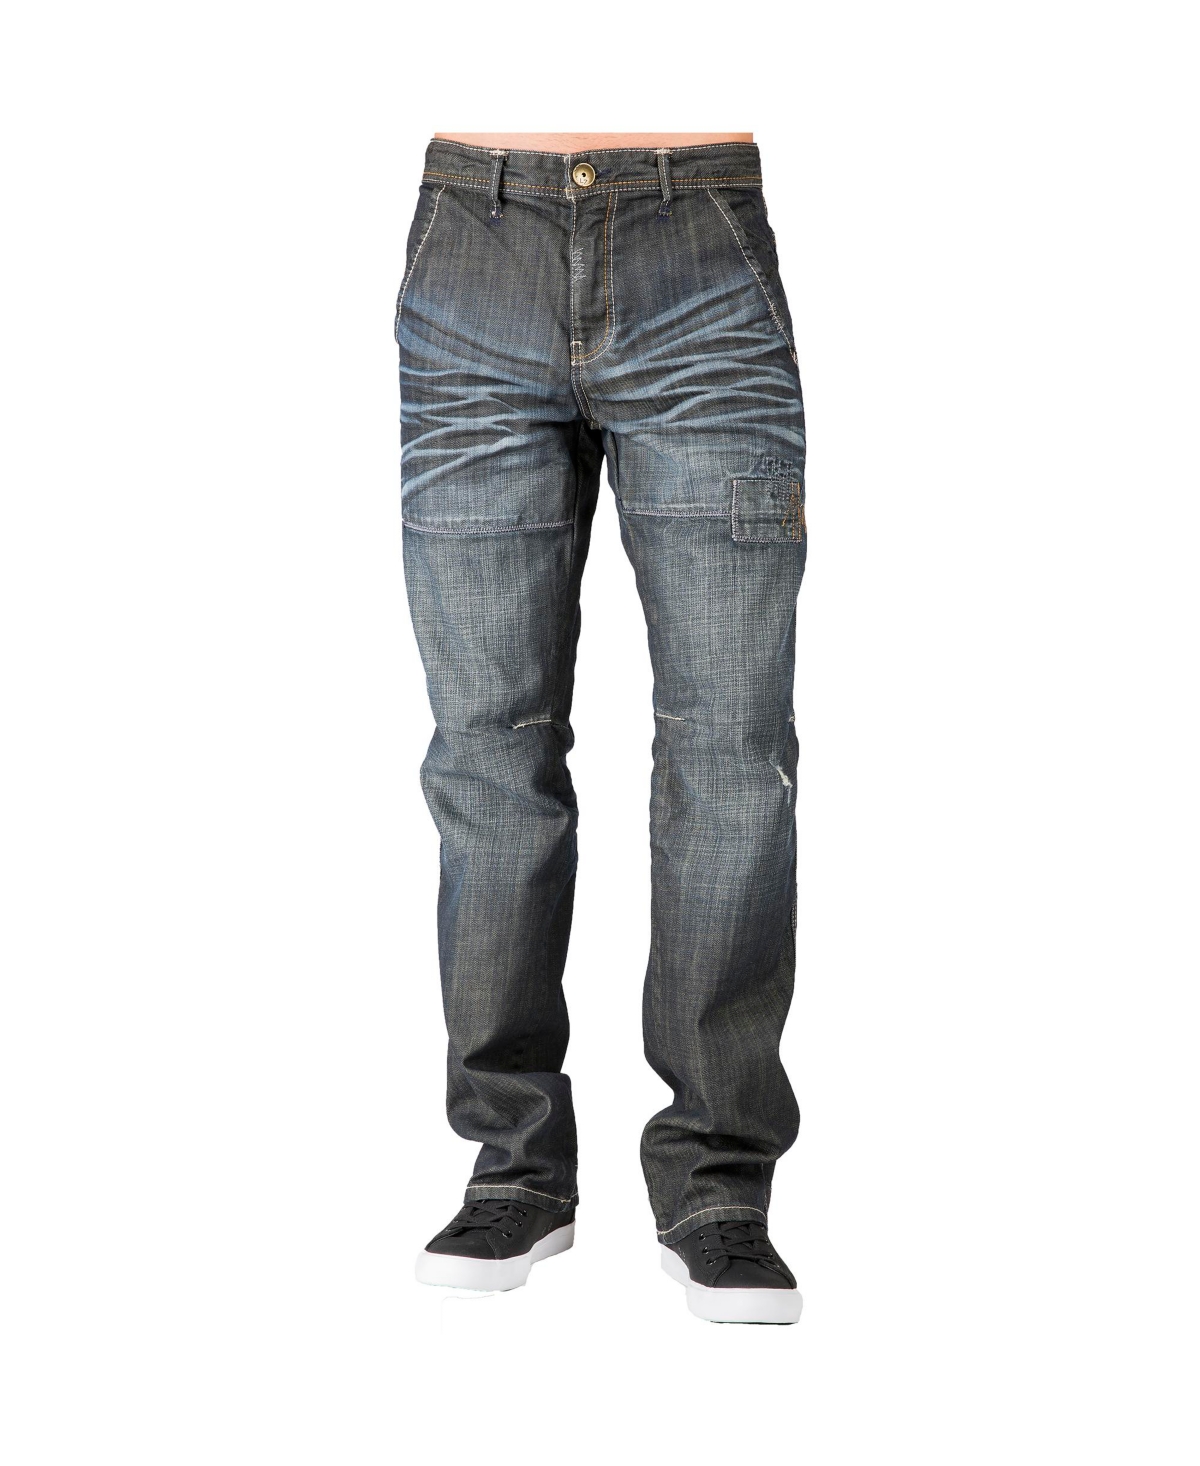 Men's Relaxed Straight Premium Jeans Vintage-like Whisker Ripped & Repaired - Blue collar